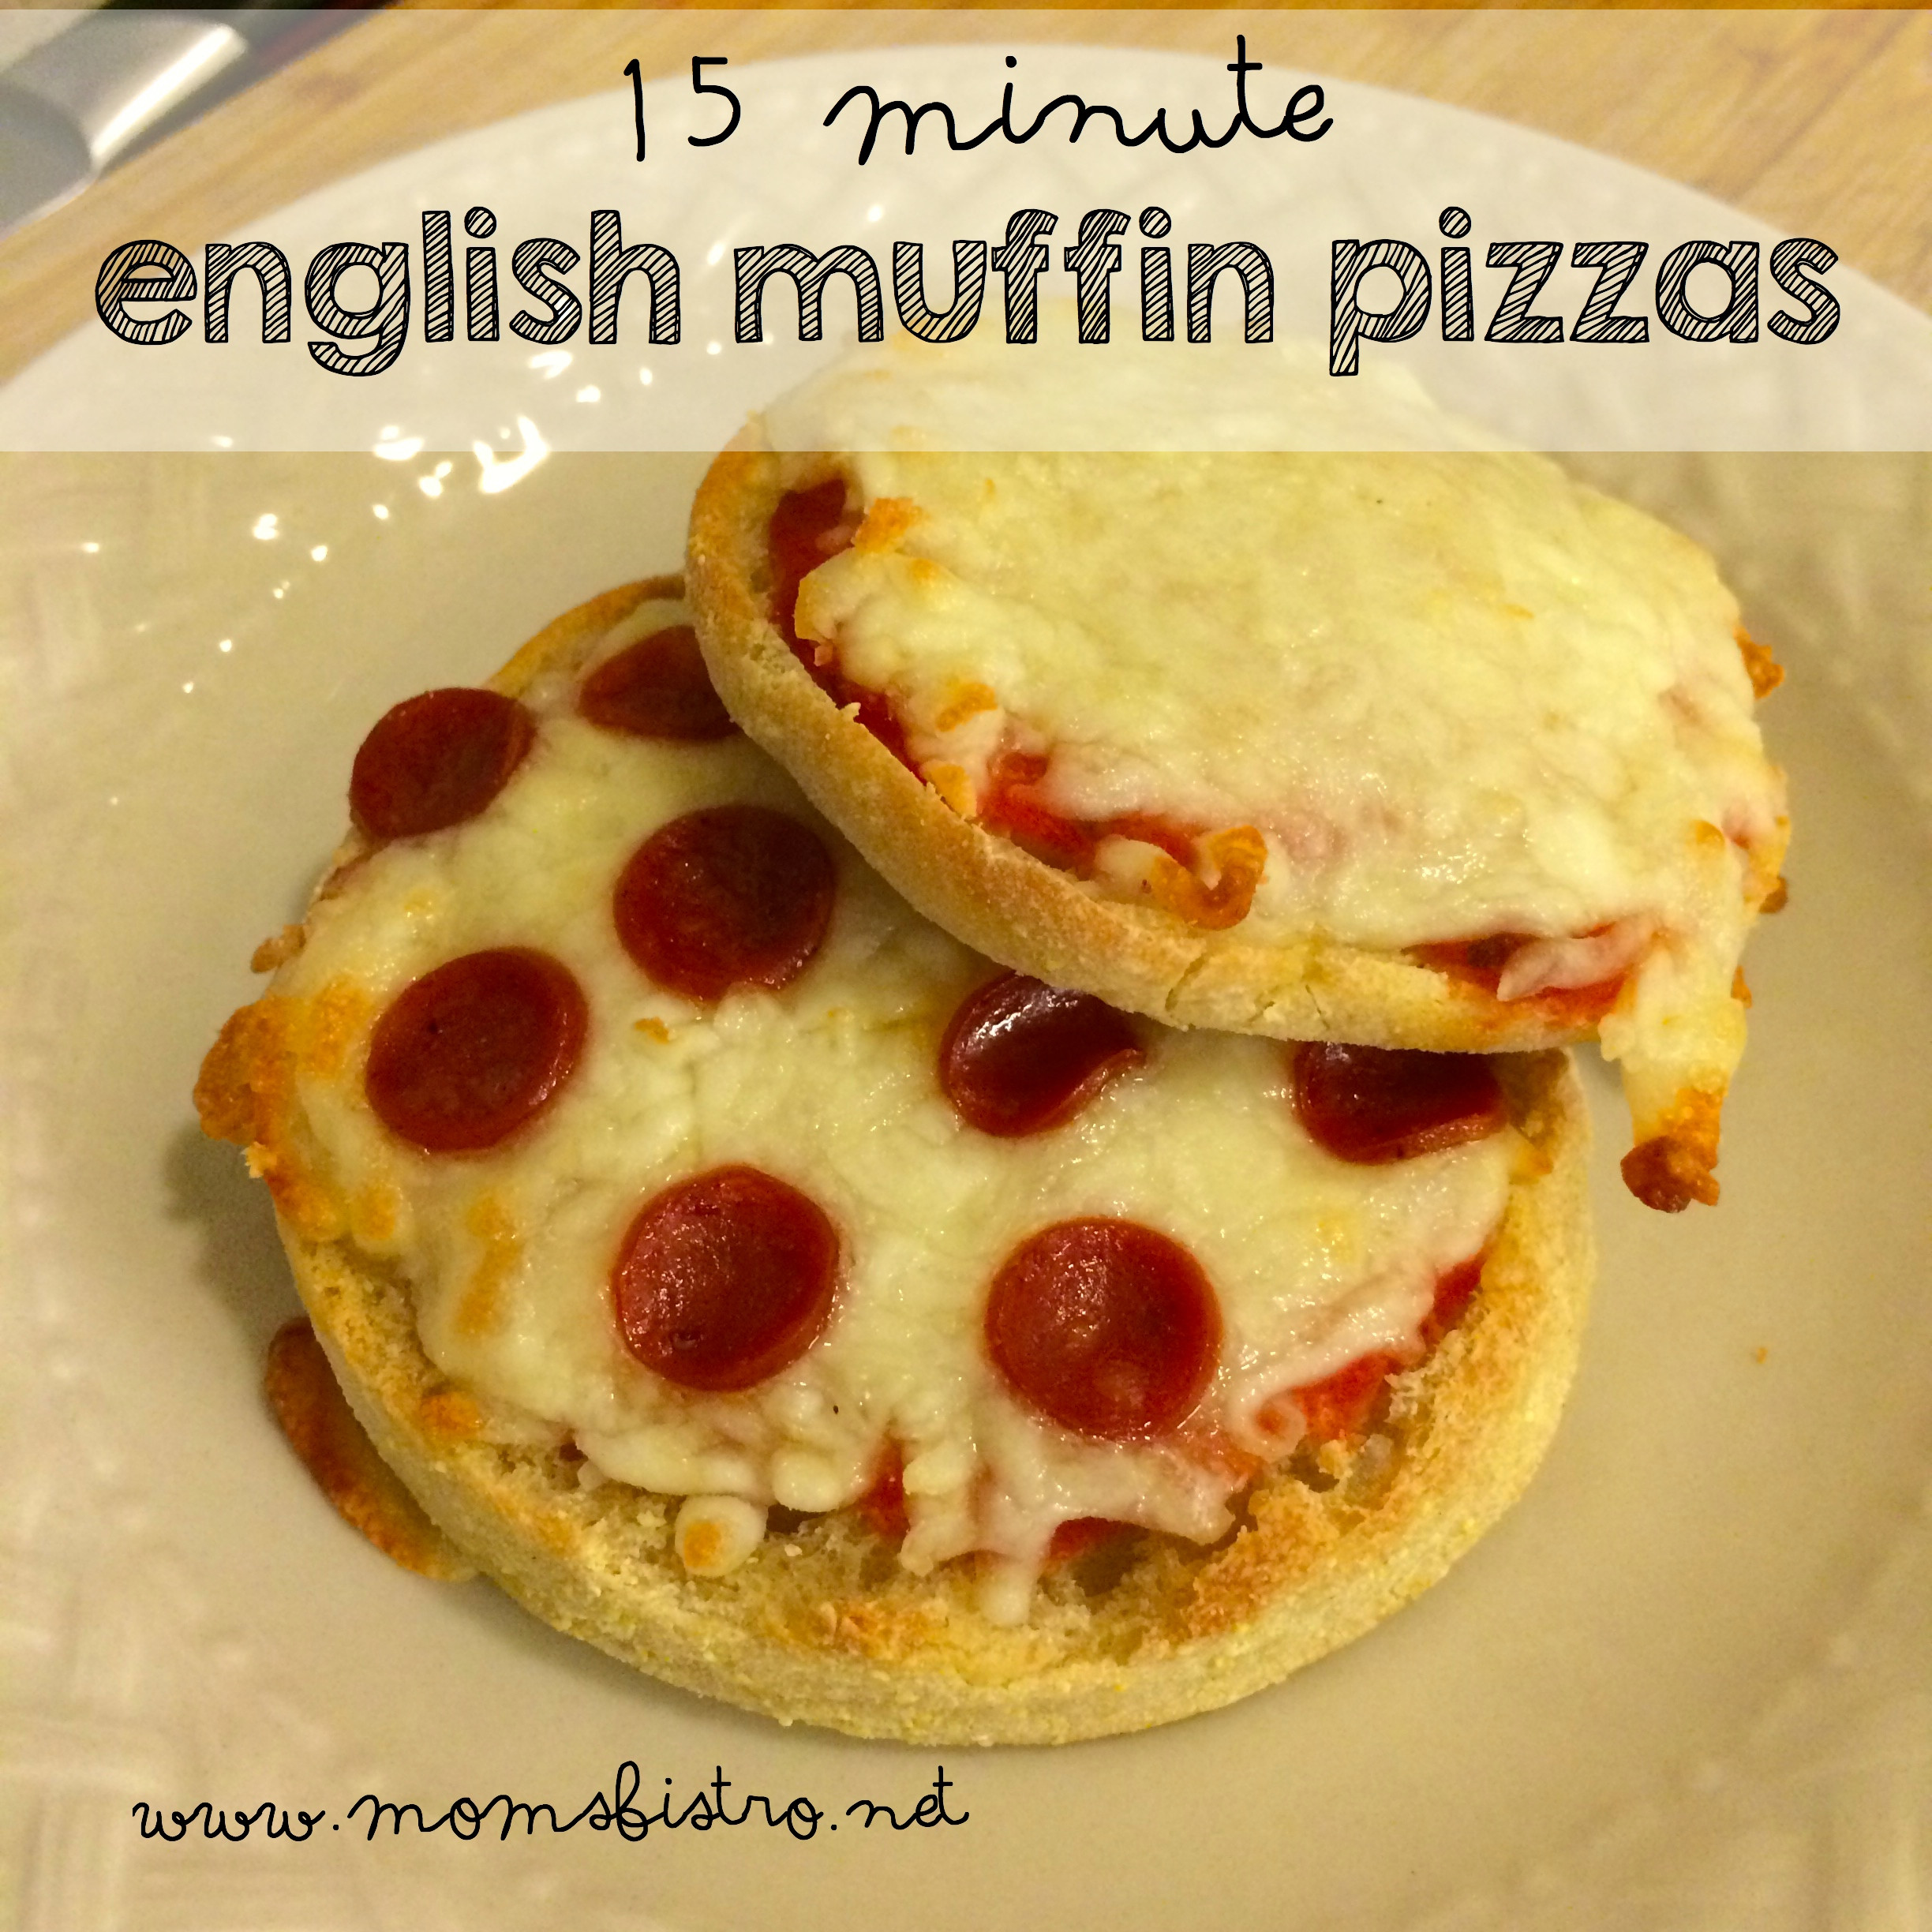 Pizza Recipes For Kids
 Cooking With Kids Quick & Easy 15 Minute English Muffin